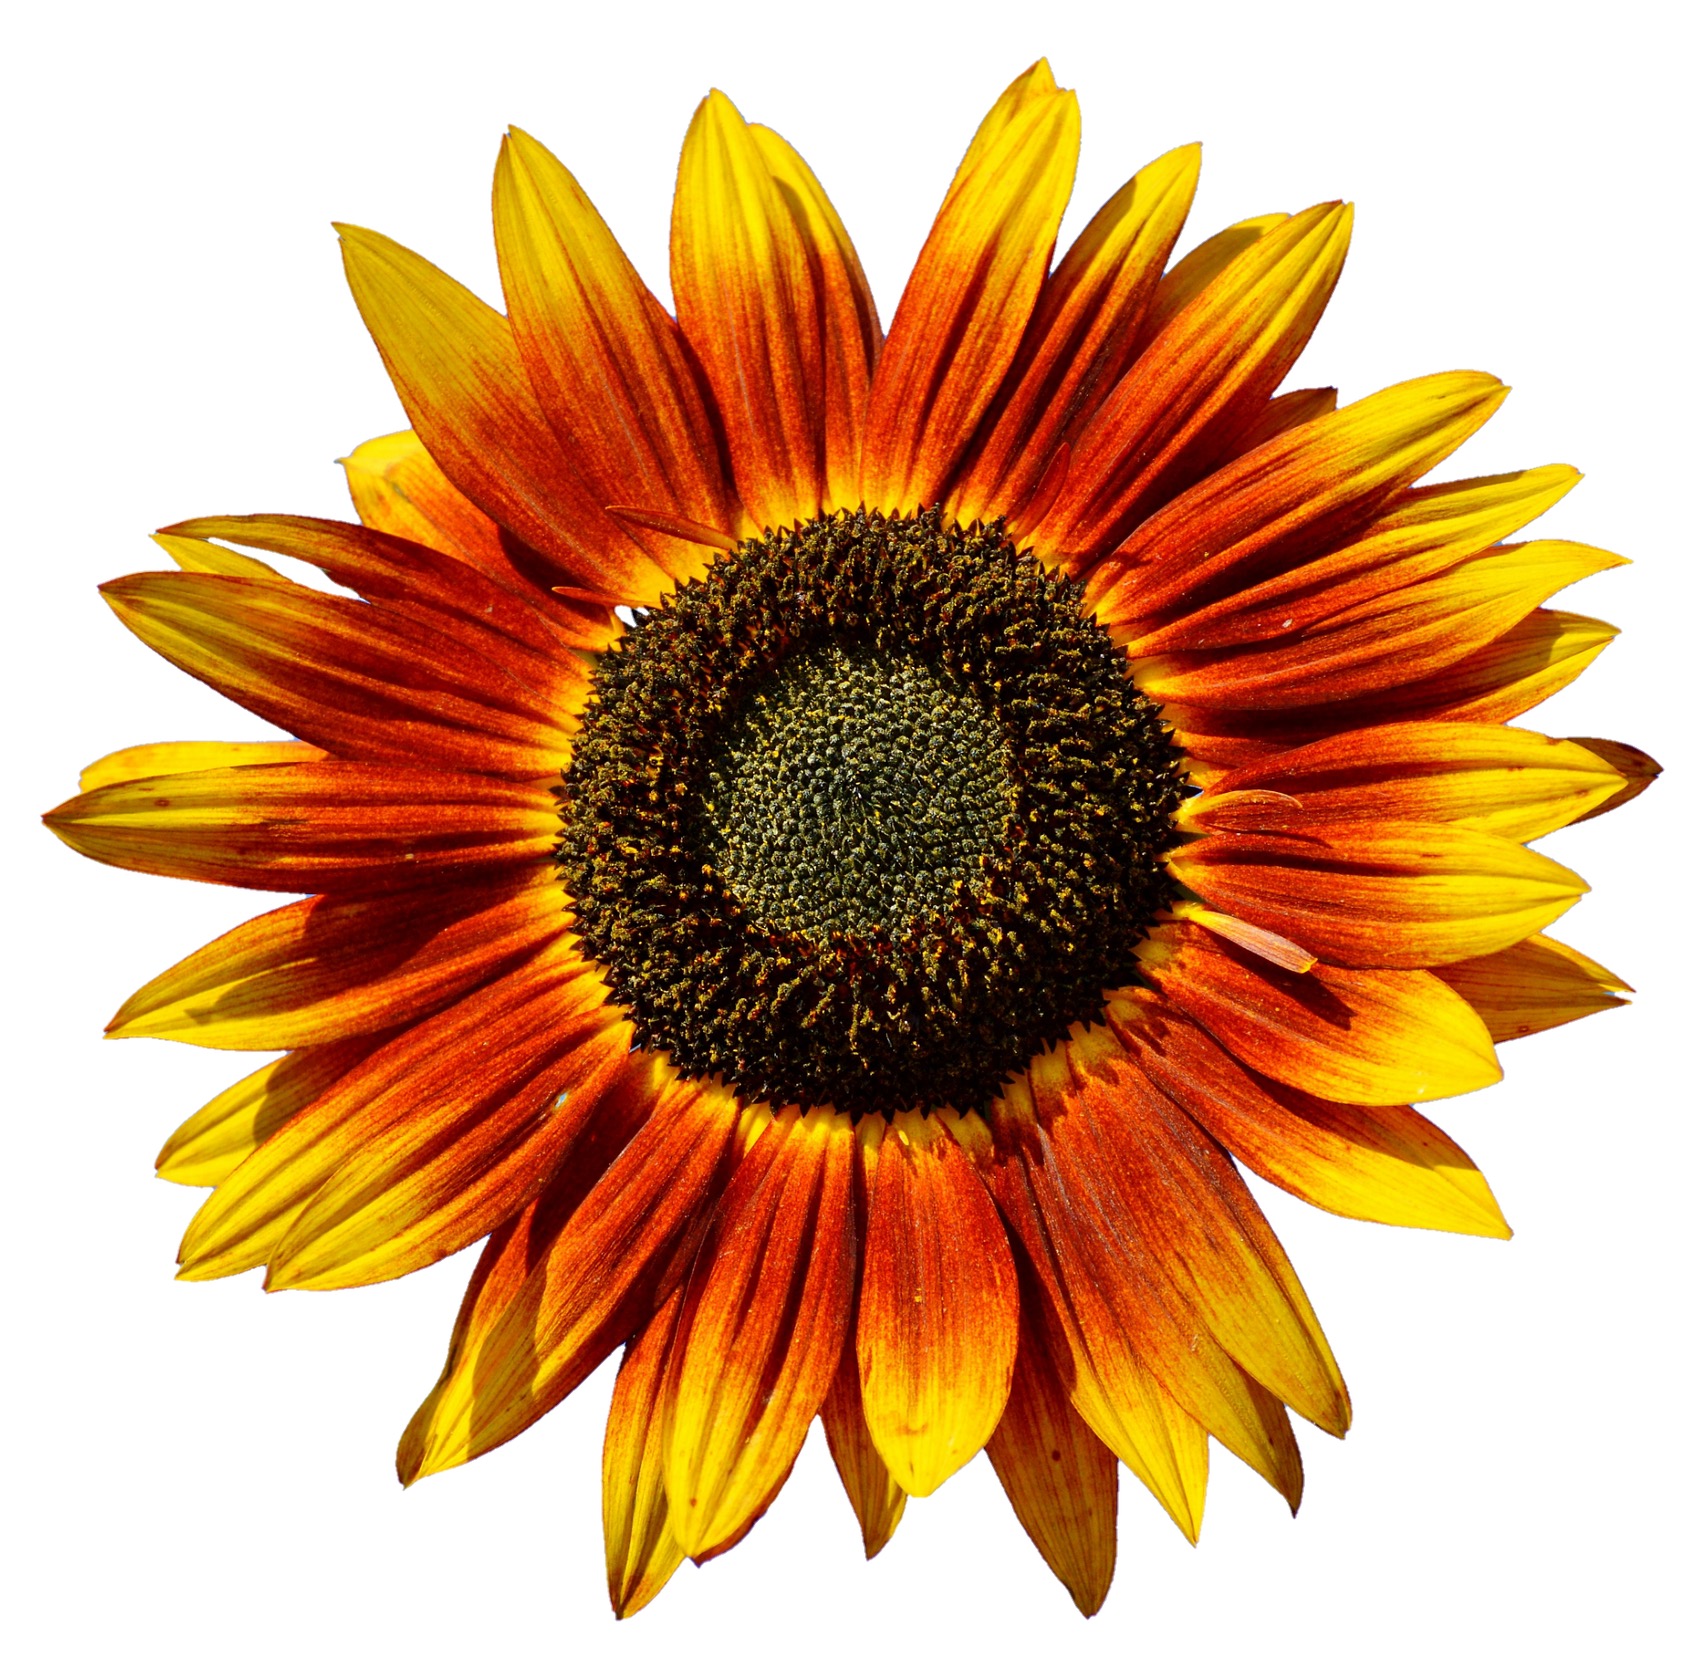 Passion Eye Serum contains Vitamin E derived from sunflowers